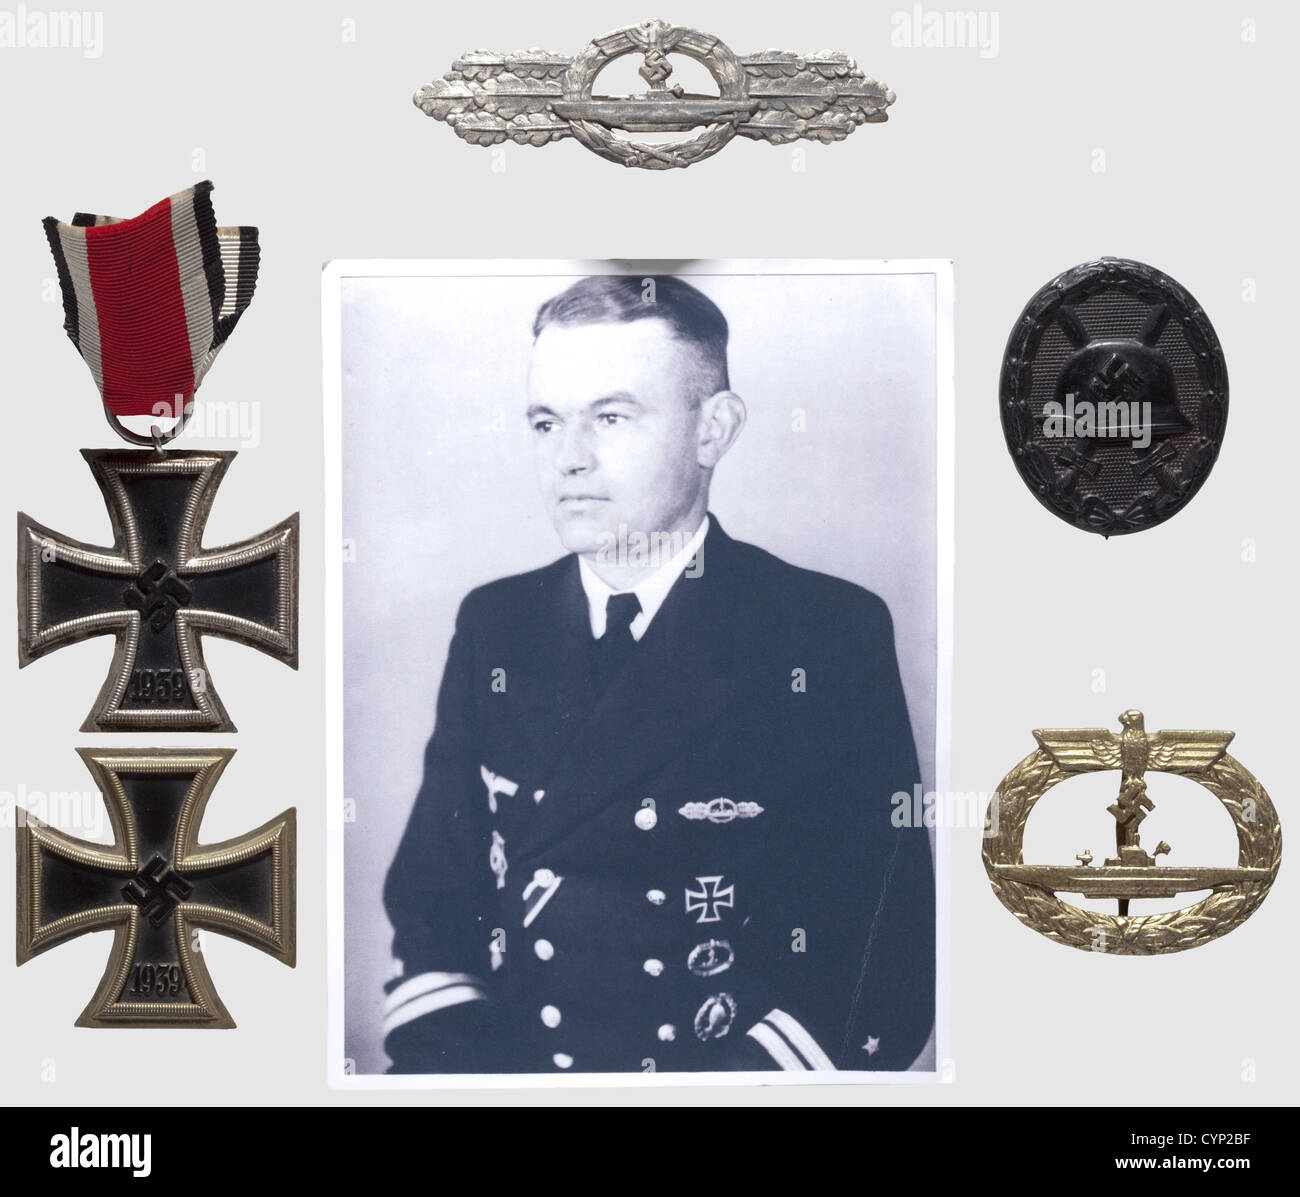 Awards and documents of U-Boat Commander Olt.z.S. Heinrich Niemeyer, U-Boat Front Clasp in Silver (corrosion), fine zinc issue by Schwerin, Berlin with award document (trimmed) dated 28 March 1945 as C.O. of 'U-3532', award document (trimmed) for the U-Boat Front clasp in Bronze dated 7 historic, historical, people, 1930s, 20th century, navy, naval forces, military, militaria, branch of service, branches of service, armed forces, armed service, object, objects, stills, clipping, clippings, cut out, cut-out, cut-outs, man, men, male, Additional-Rights-Clearences-Not Available Stock Photo